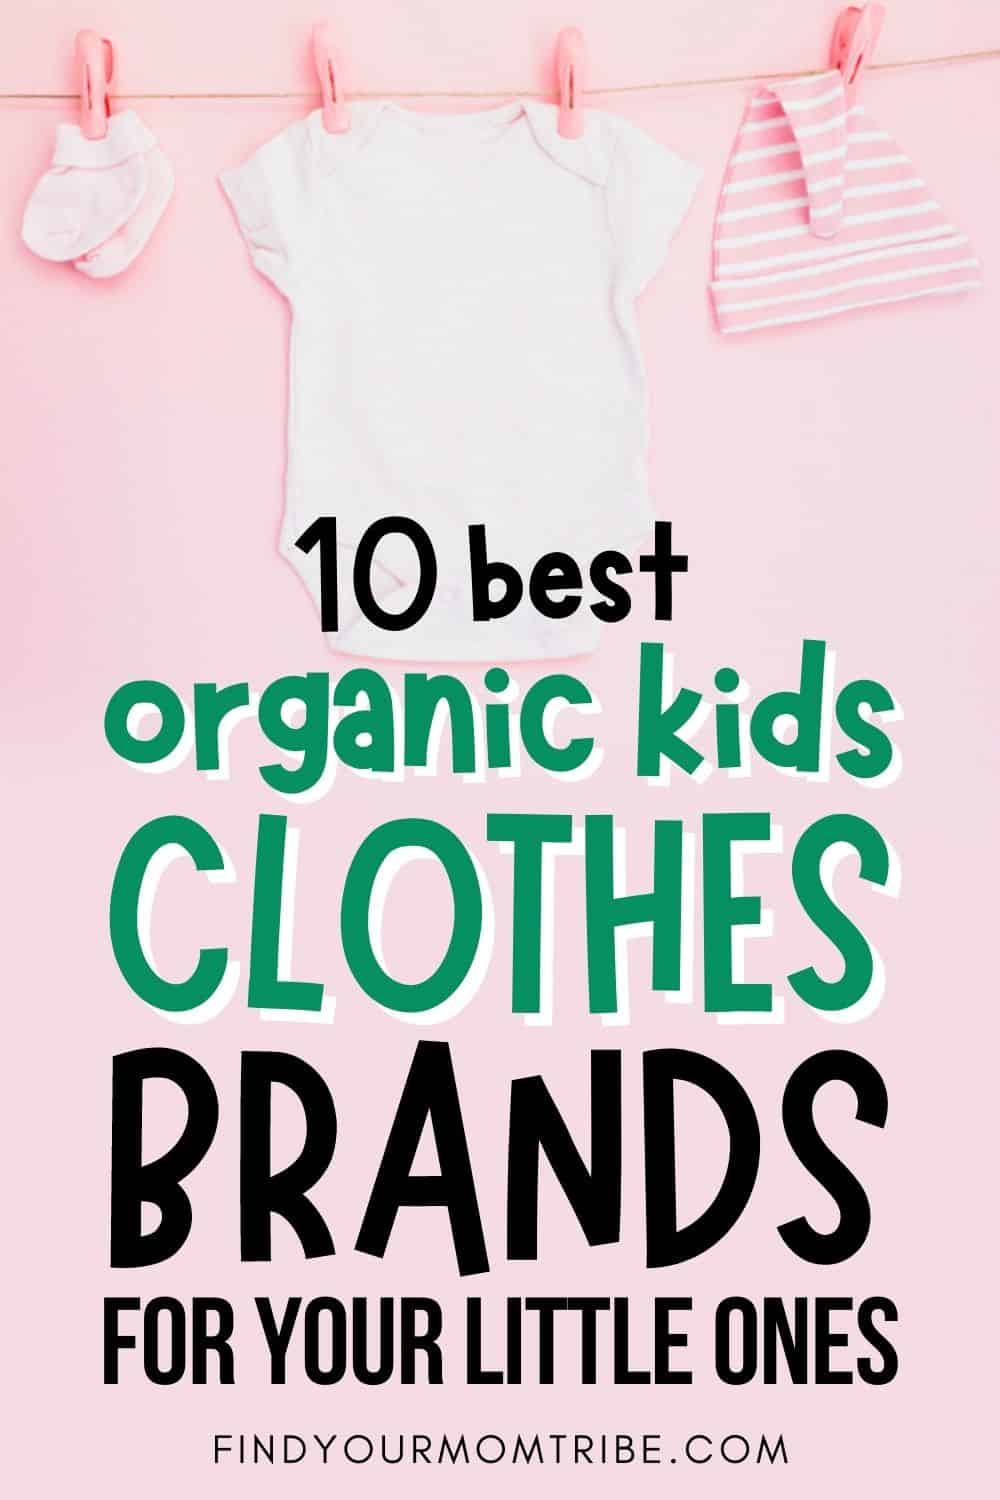 10 Best Organic Kids Clothes Brands For Your Little Ones Pinterest